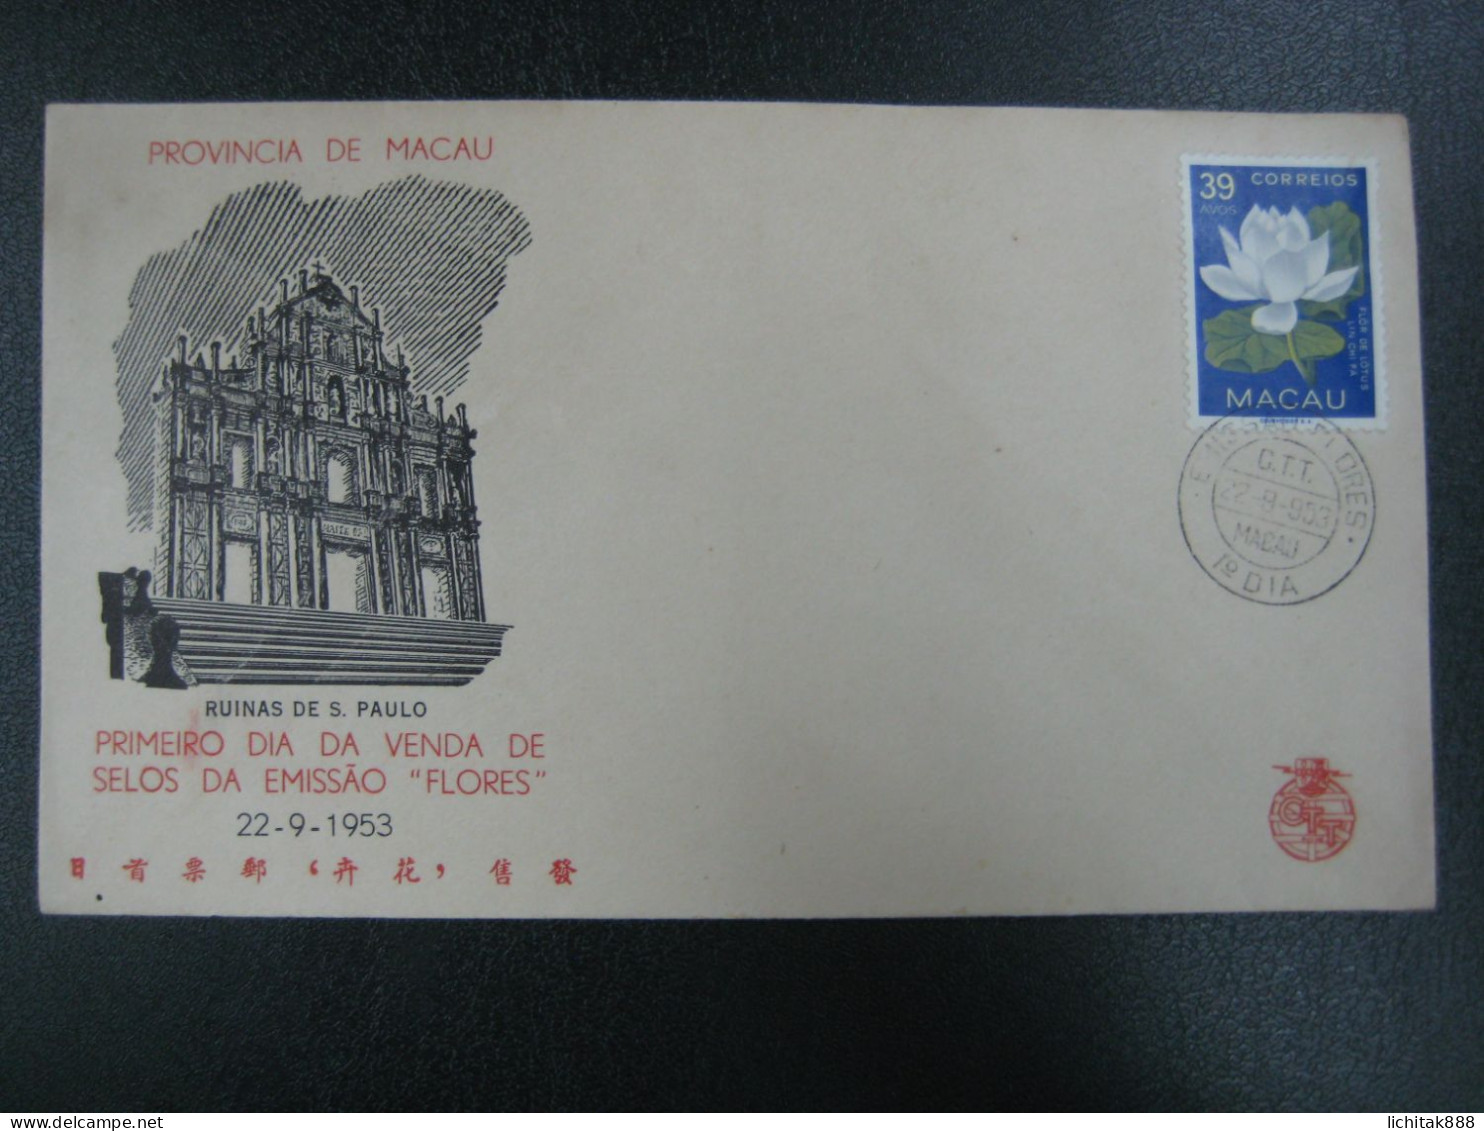 Macau Macao 1953 Indigenous Flowers 39 Avos Stamps FDC - FDC